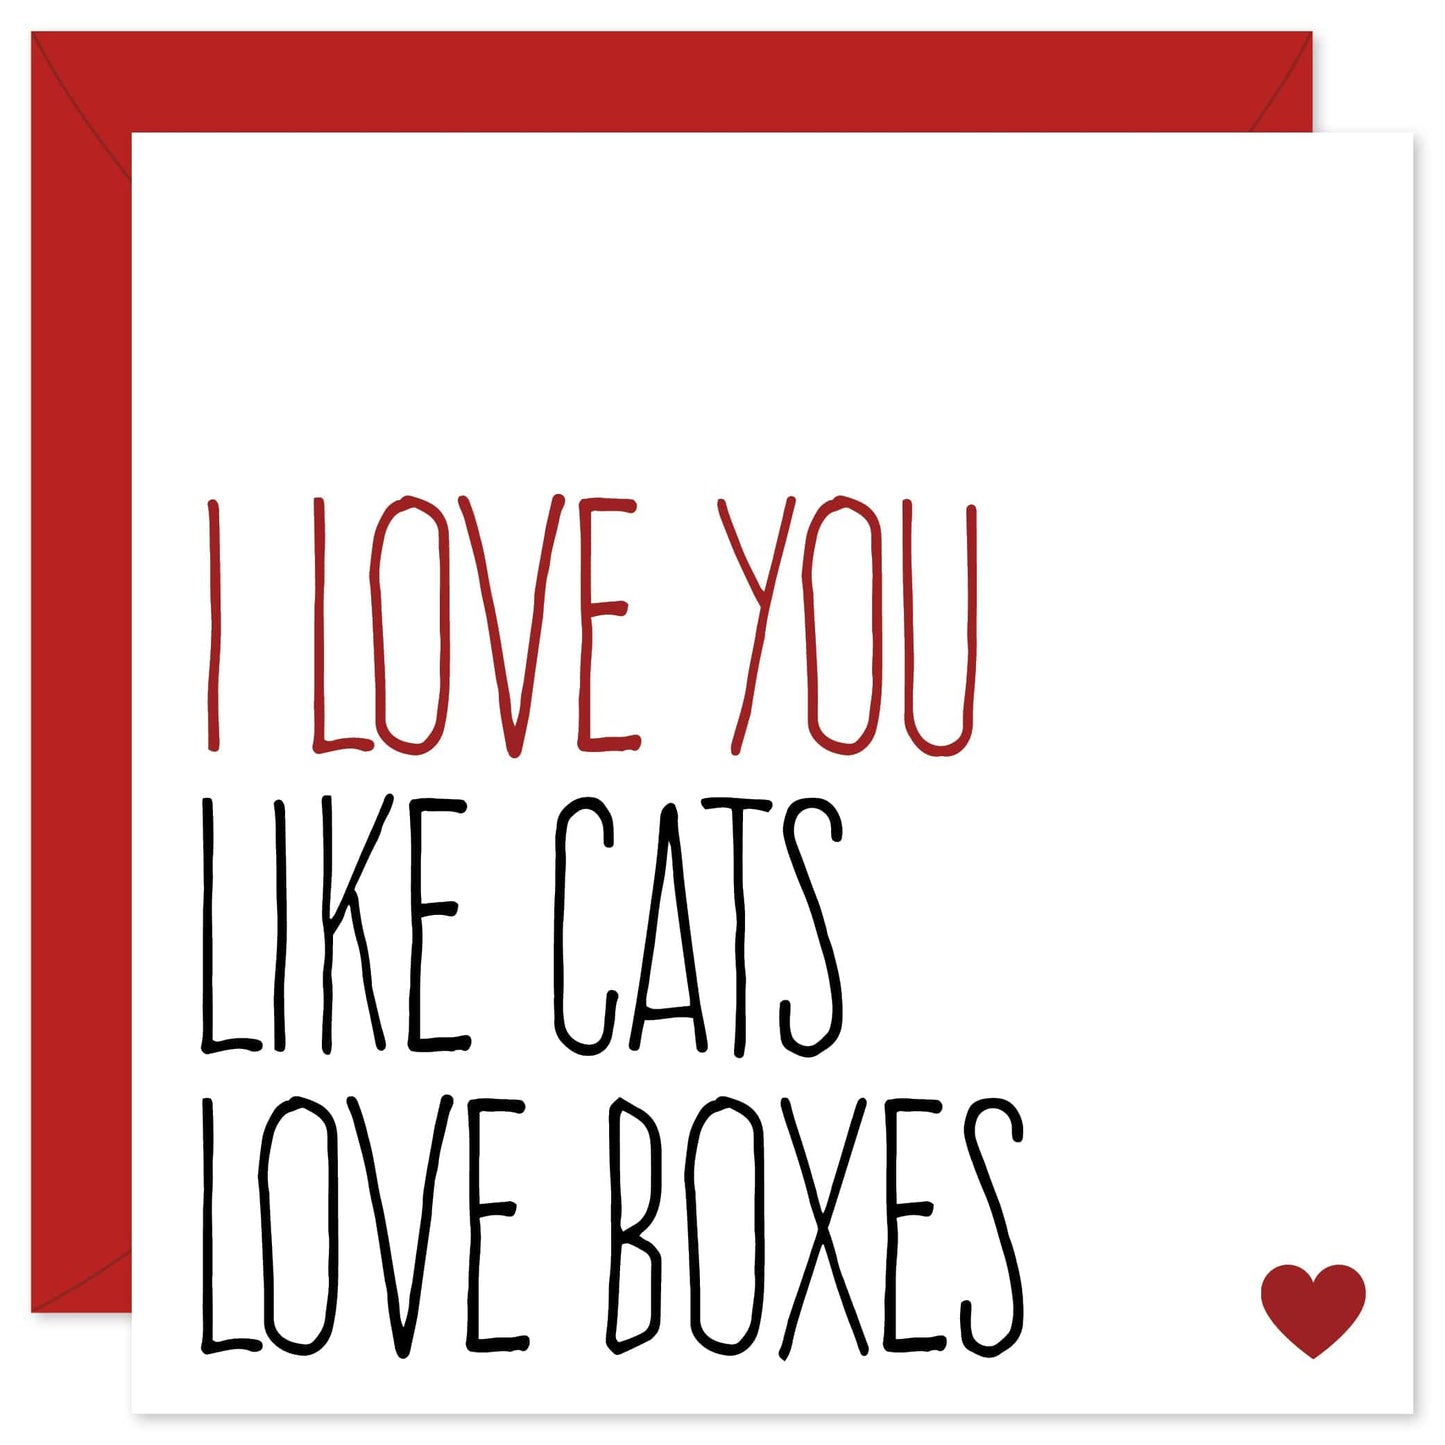 Cats love boxes Valentine's Day card from Purple Tree Designs